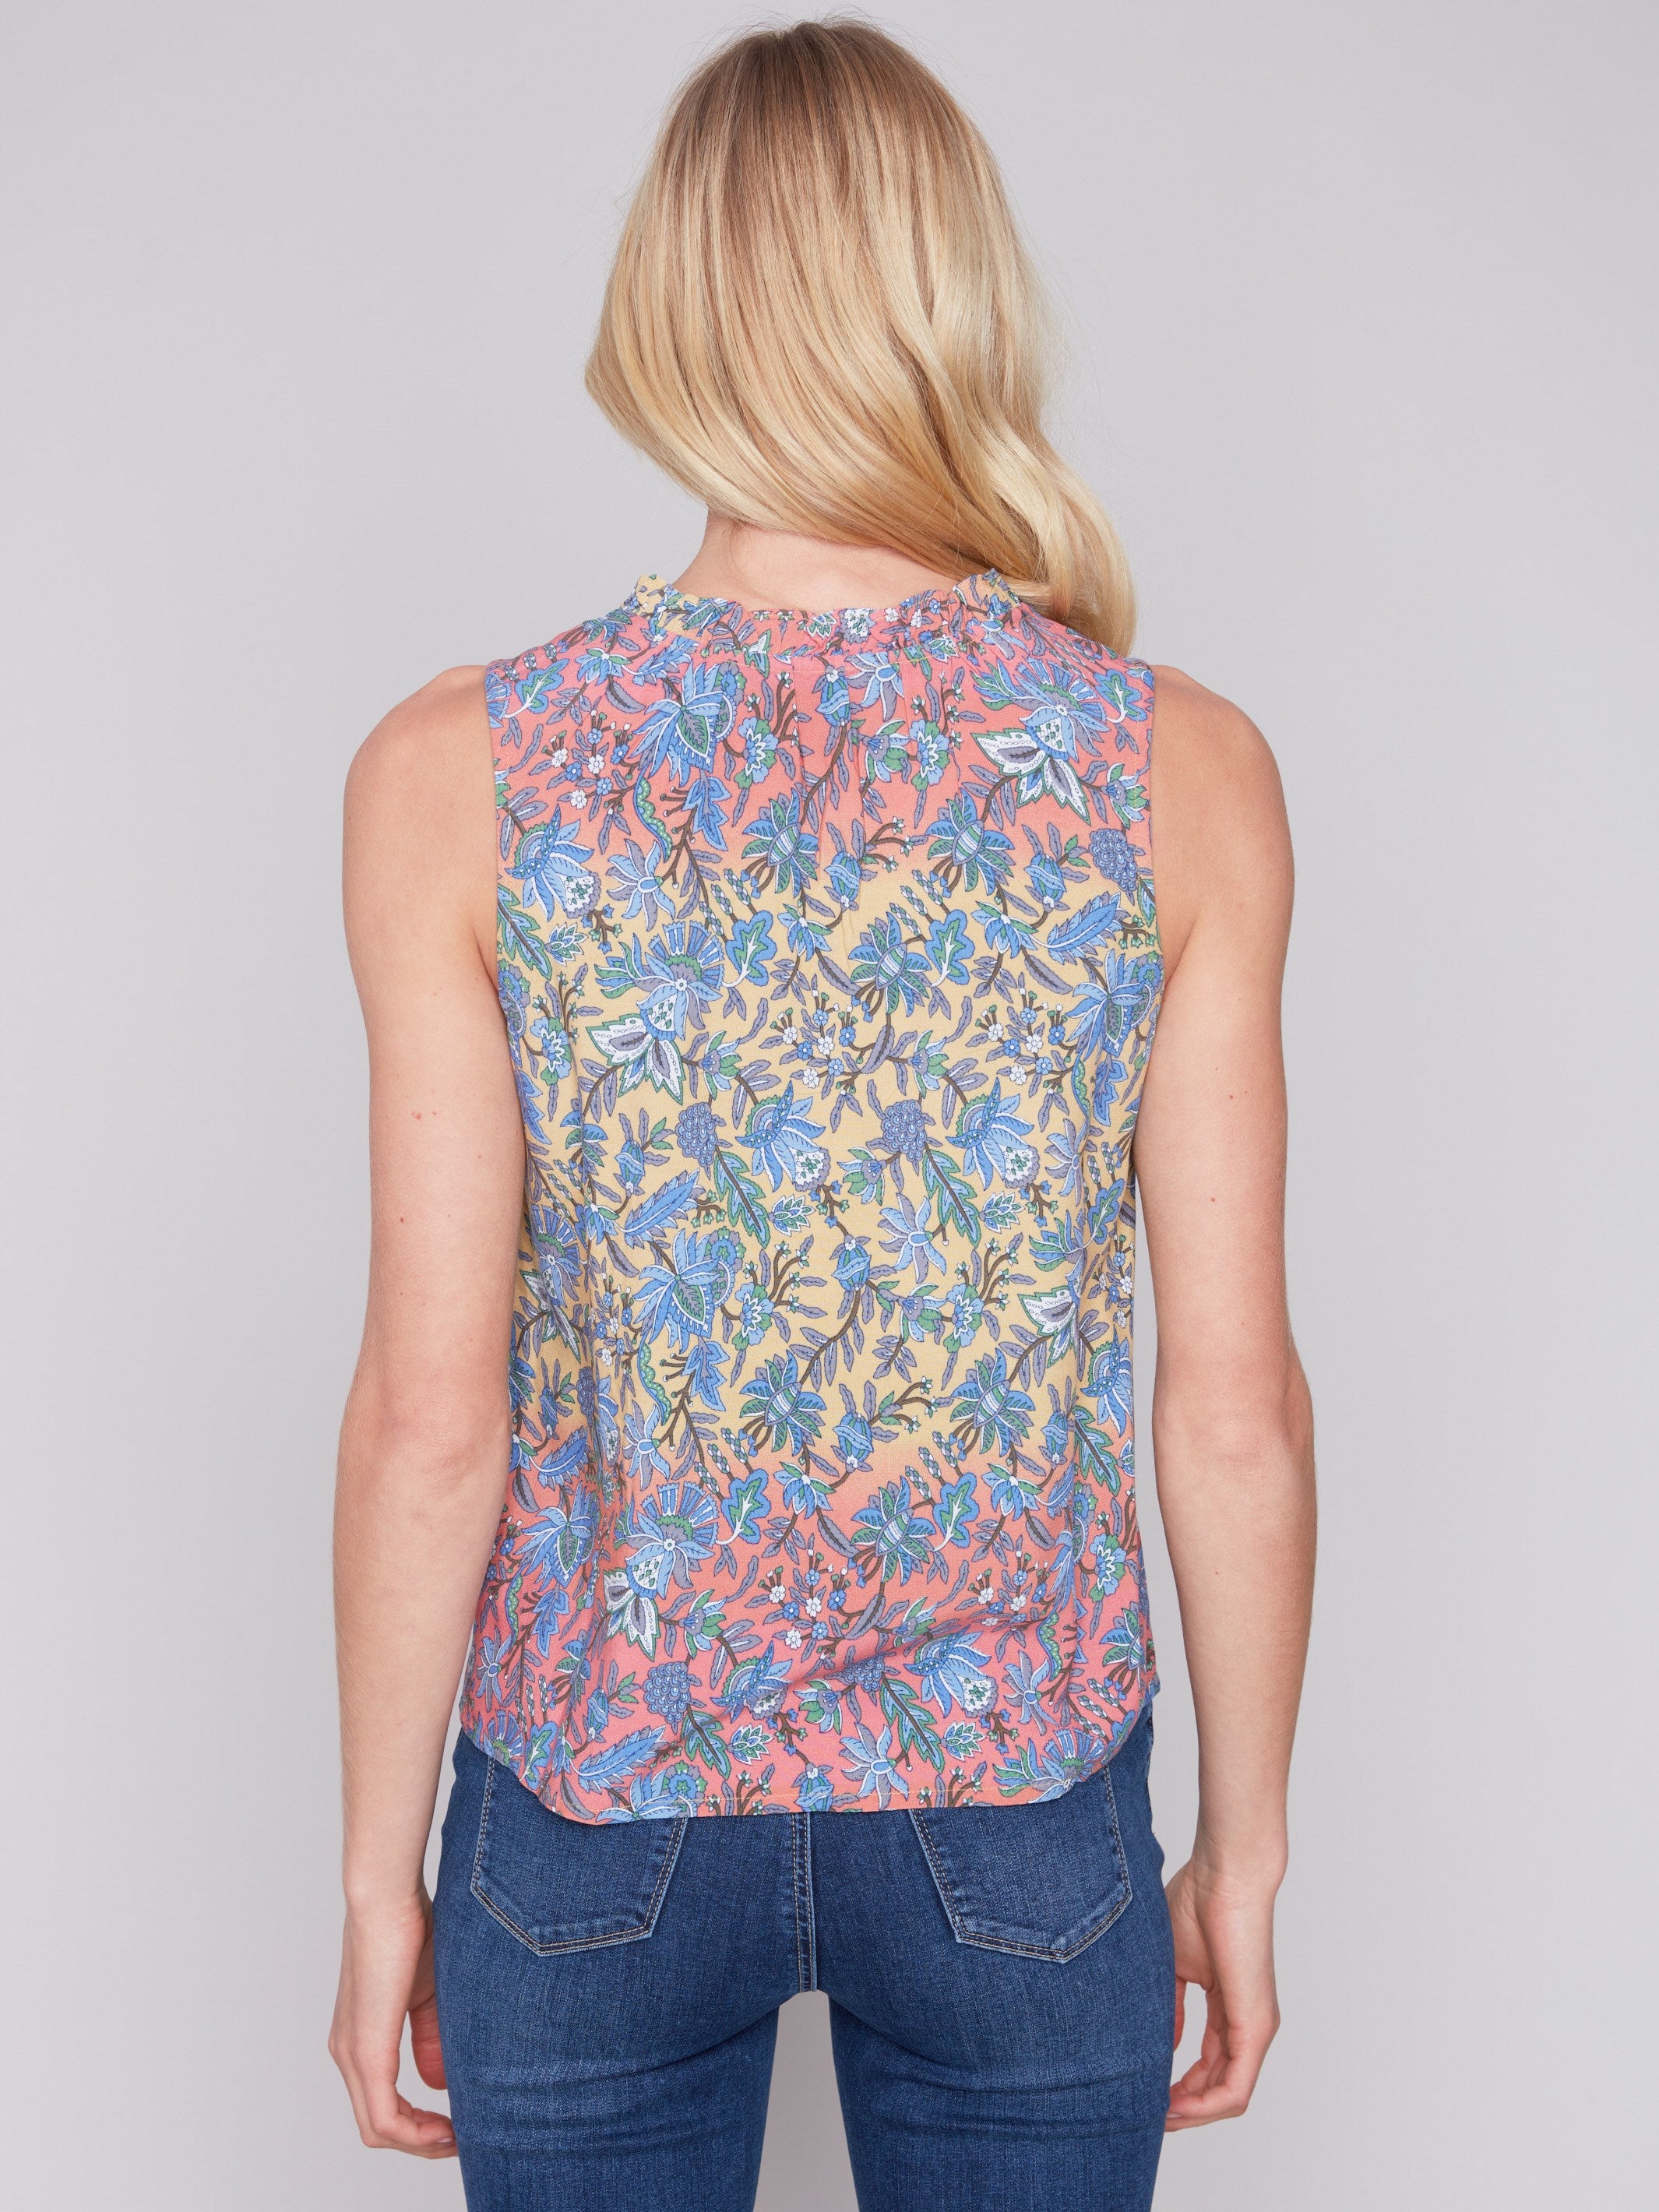 Sleeveless Printed Ruffle Neck Blouse - Glory - Charlie B Collection Canada - Image 4